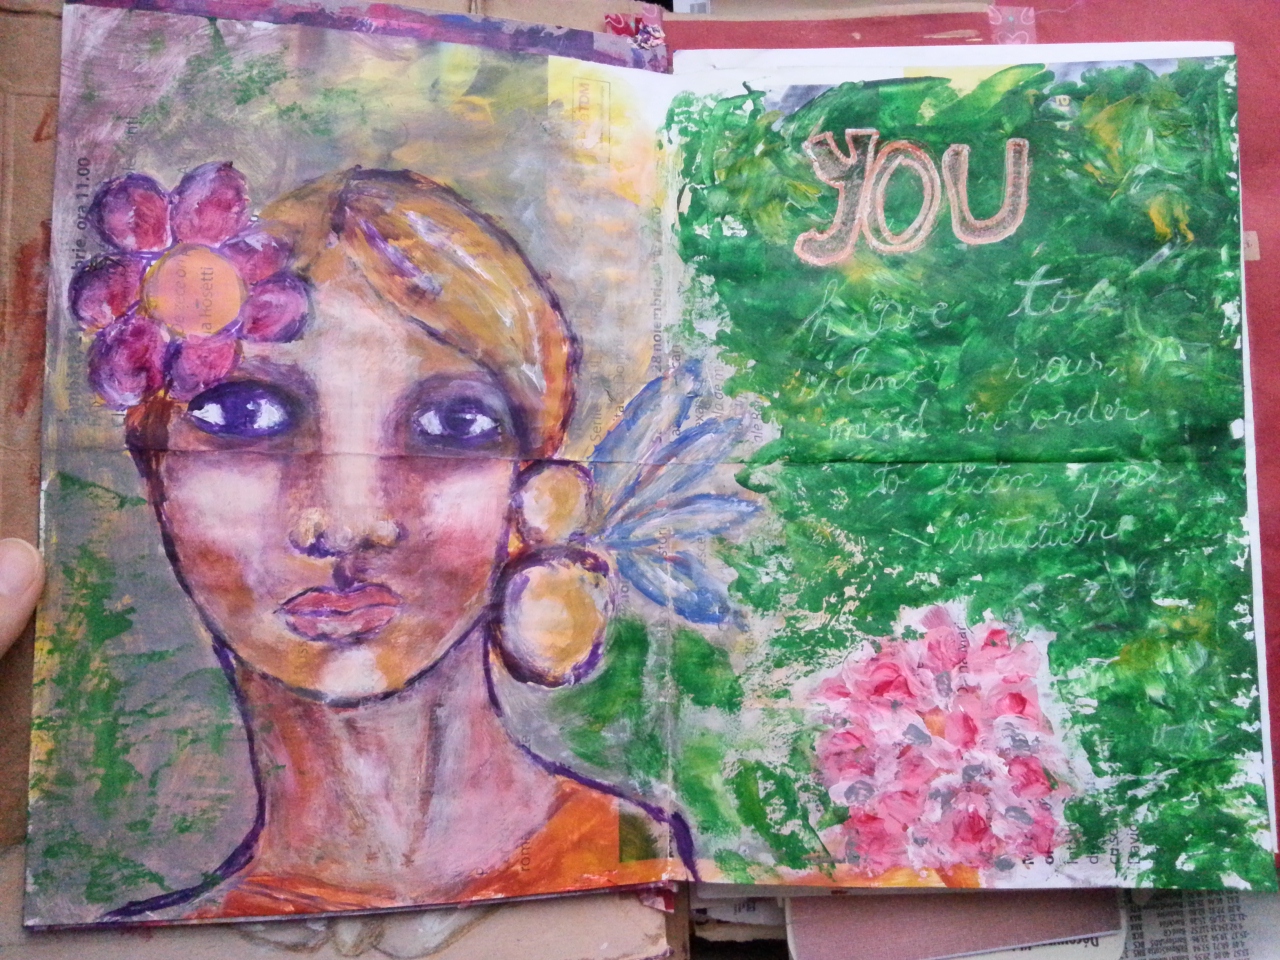 The junk journal project – leaflet painting over